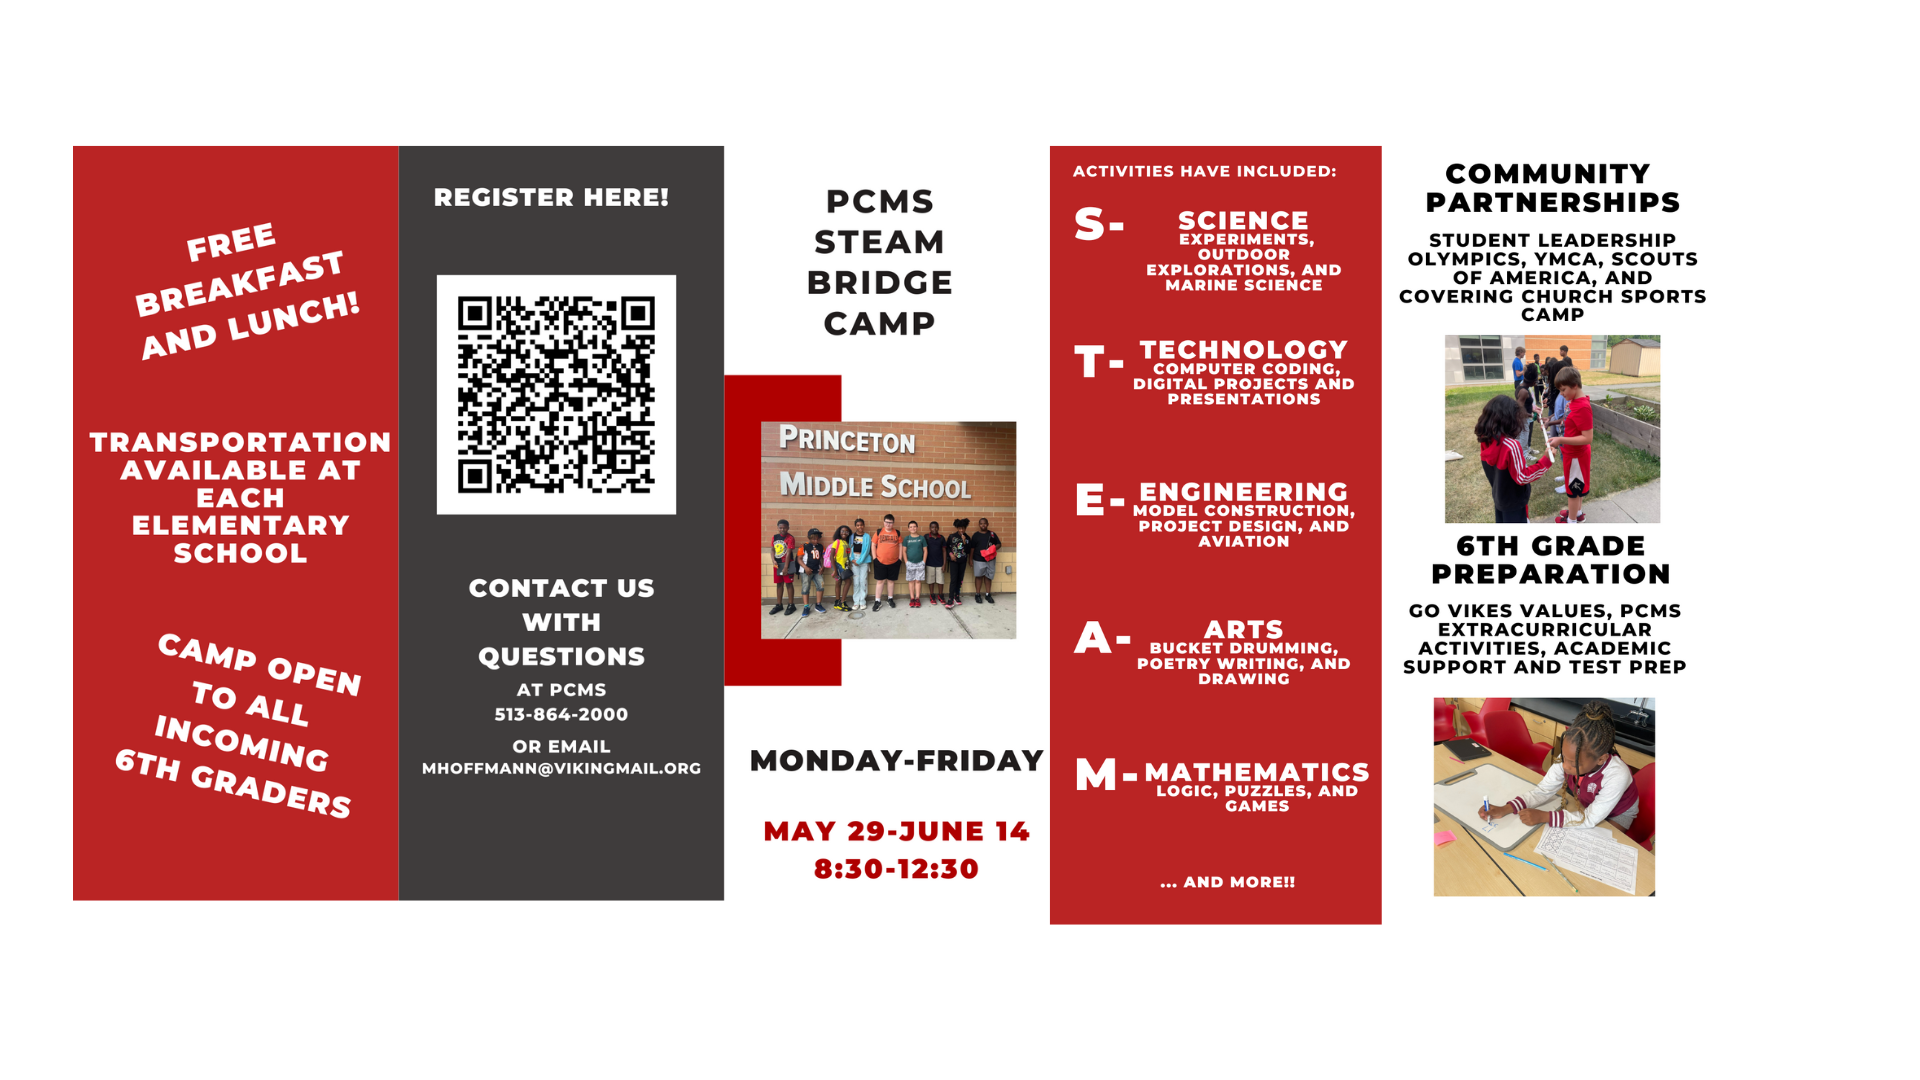 Sign up today for the PCMS STEAM Bridge Camp!  Incoming 6th Graders are invited to join us Monday-Friday May 29-June 14, 2024  Community Partnerships:  Student Leadership Olympics  YMCA  Scouts of America  Covering Church Sports Camp  6th Grade Preparation  Go Vikes Values  PCMS Extracurricular Activities  Academic Support and Test Prep  Free Breakfast and Lunch  Transportation available at each elementary school  Camp open to all incoming 6th Graders!  Contact us with questions: 513-864-2000 or email: mhoffmann@vikingmail.org  Click here to view/print the PCMS STEAM Camp brochure in English and Spanish